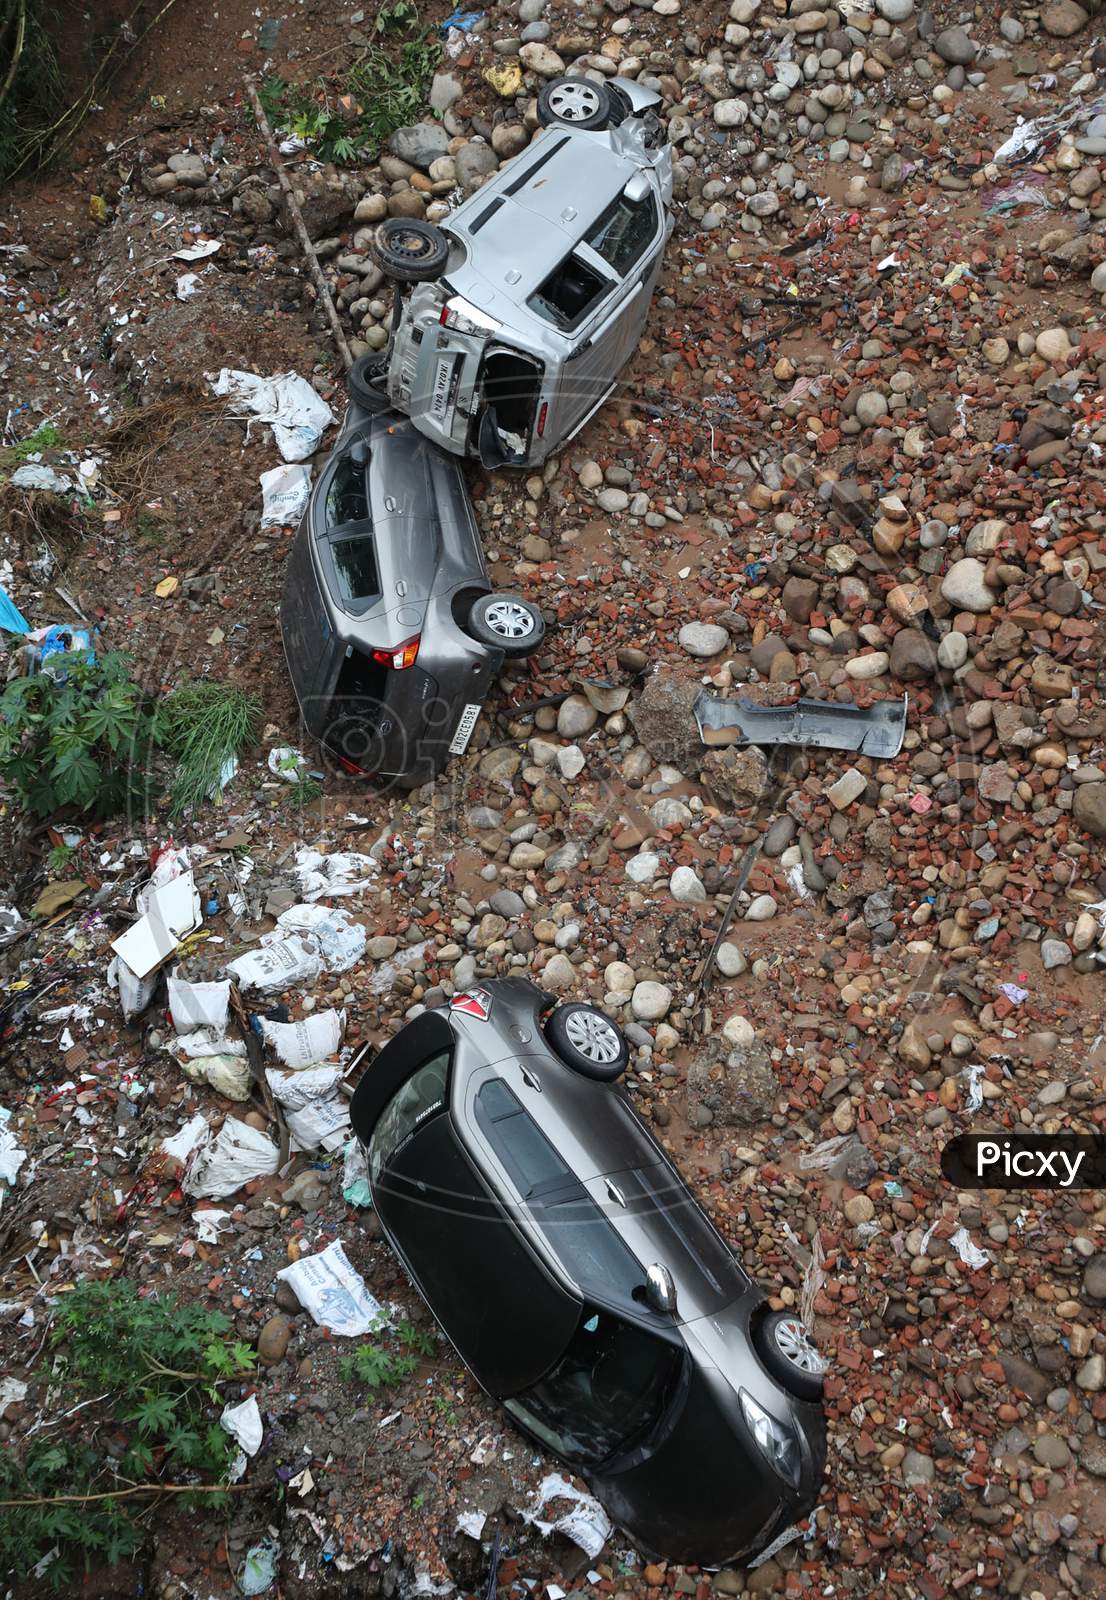 Vehicles lying damaged in a ditch after heavy rains resulted in sinking of a roadside along circular road connecting Panjtirthi with Gujjar Nagar in Jammu city  on August 17,2020.